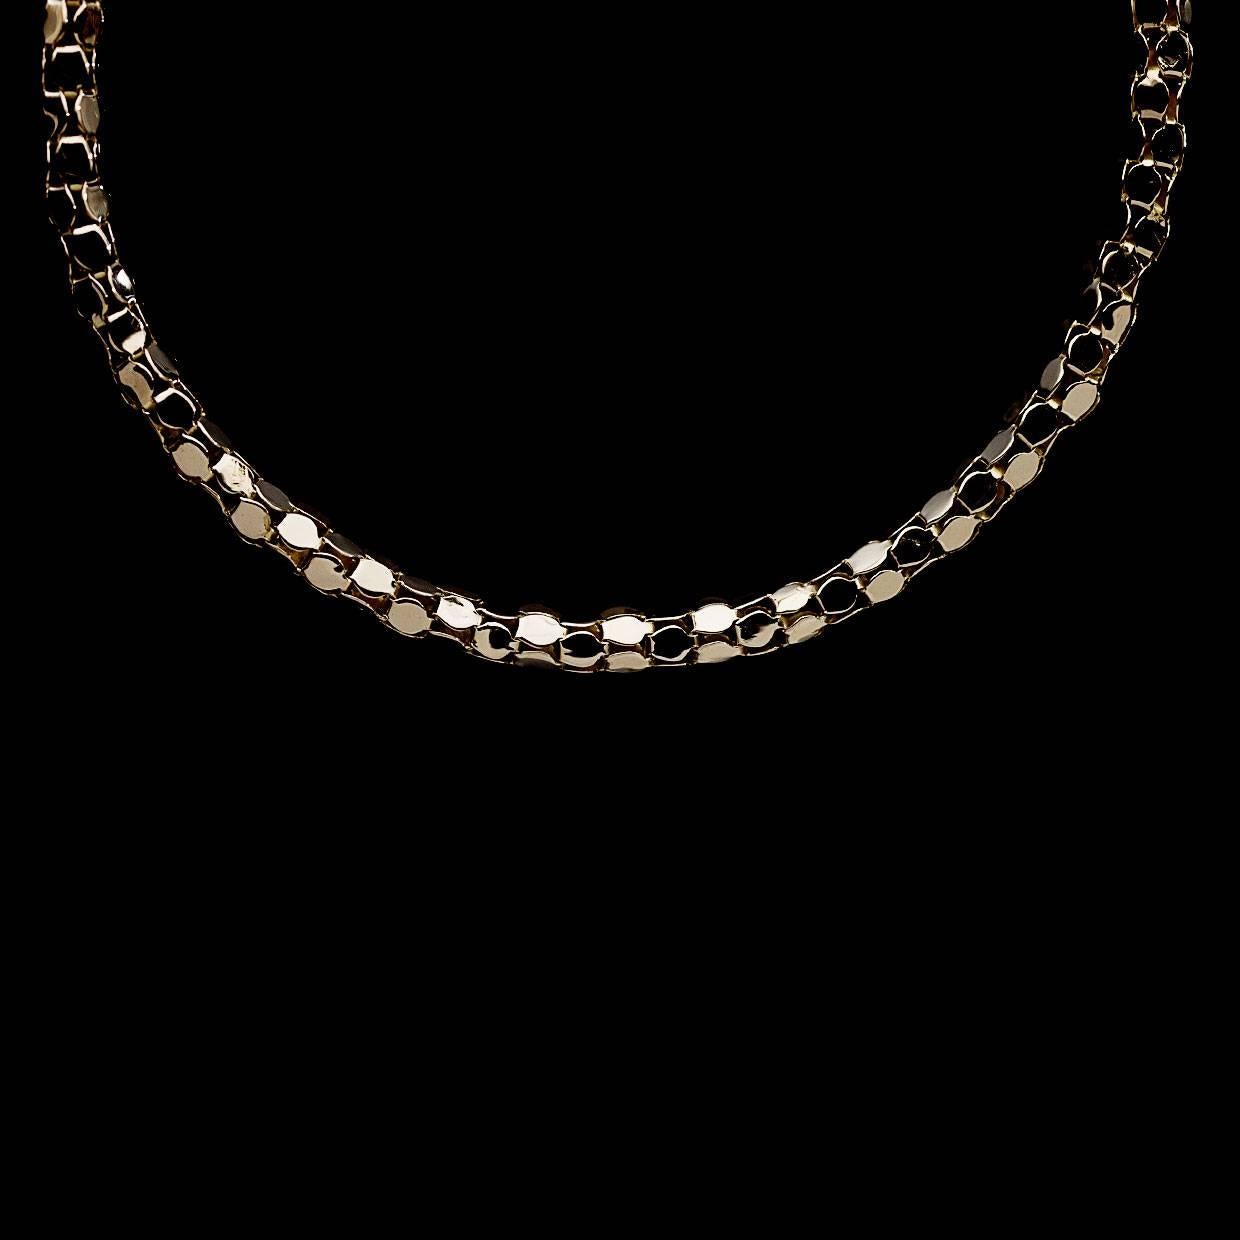 This lovely necklace offers a classy & timeless look. This necklace is made of solid 18 karat rose gold and features a unique round box style design. It measures 18